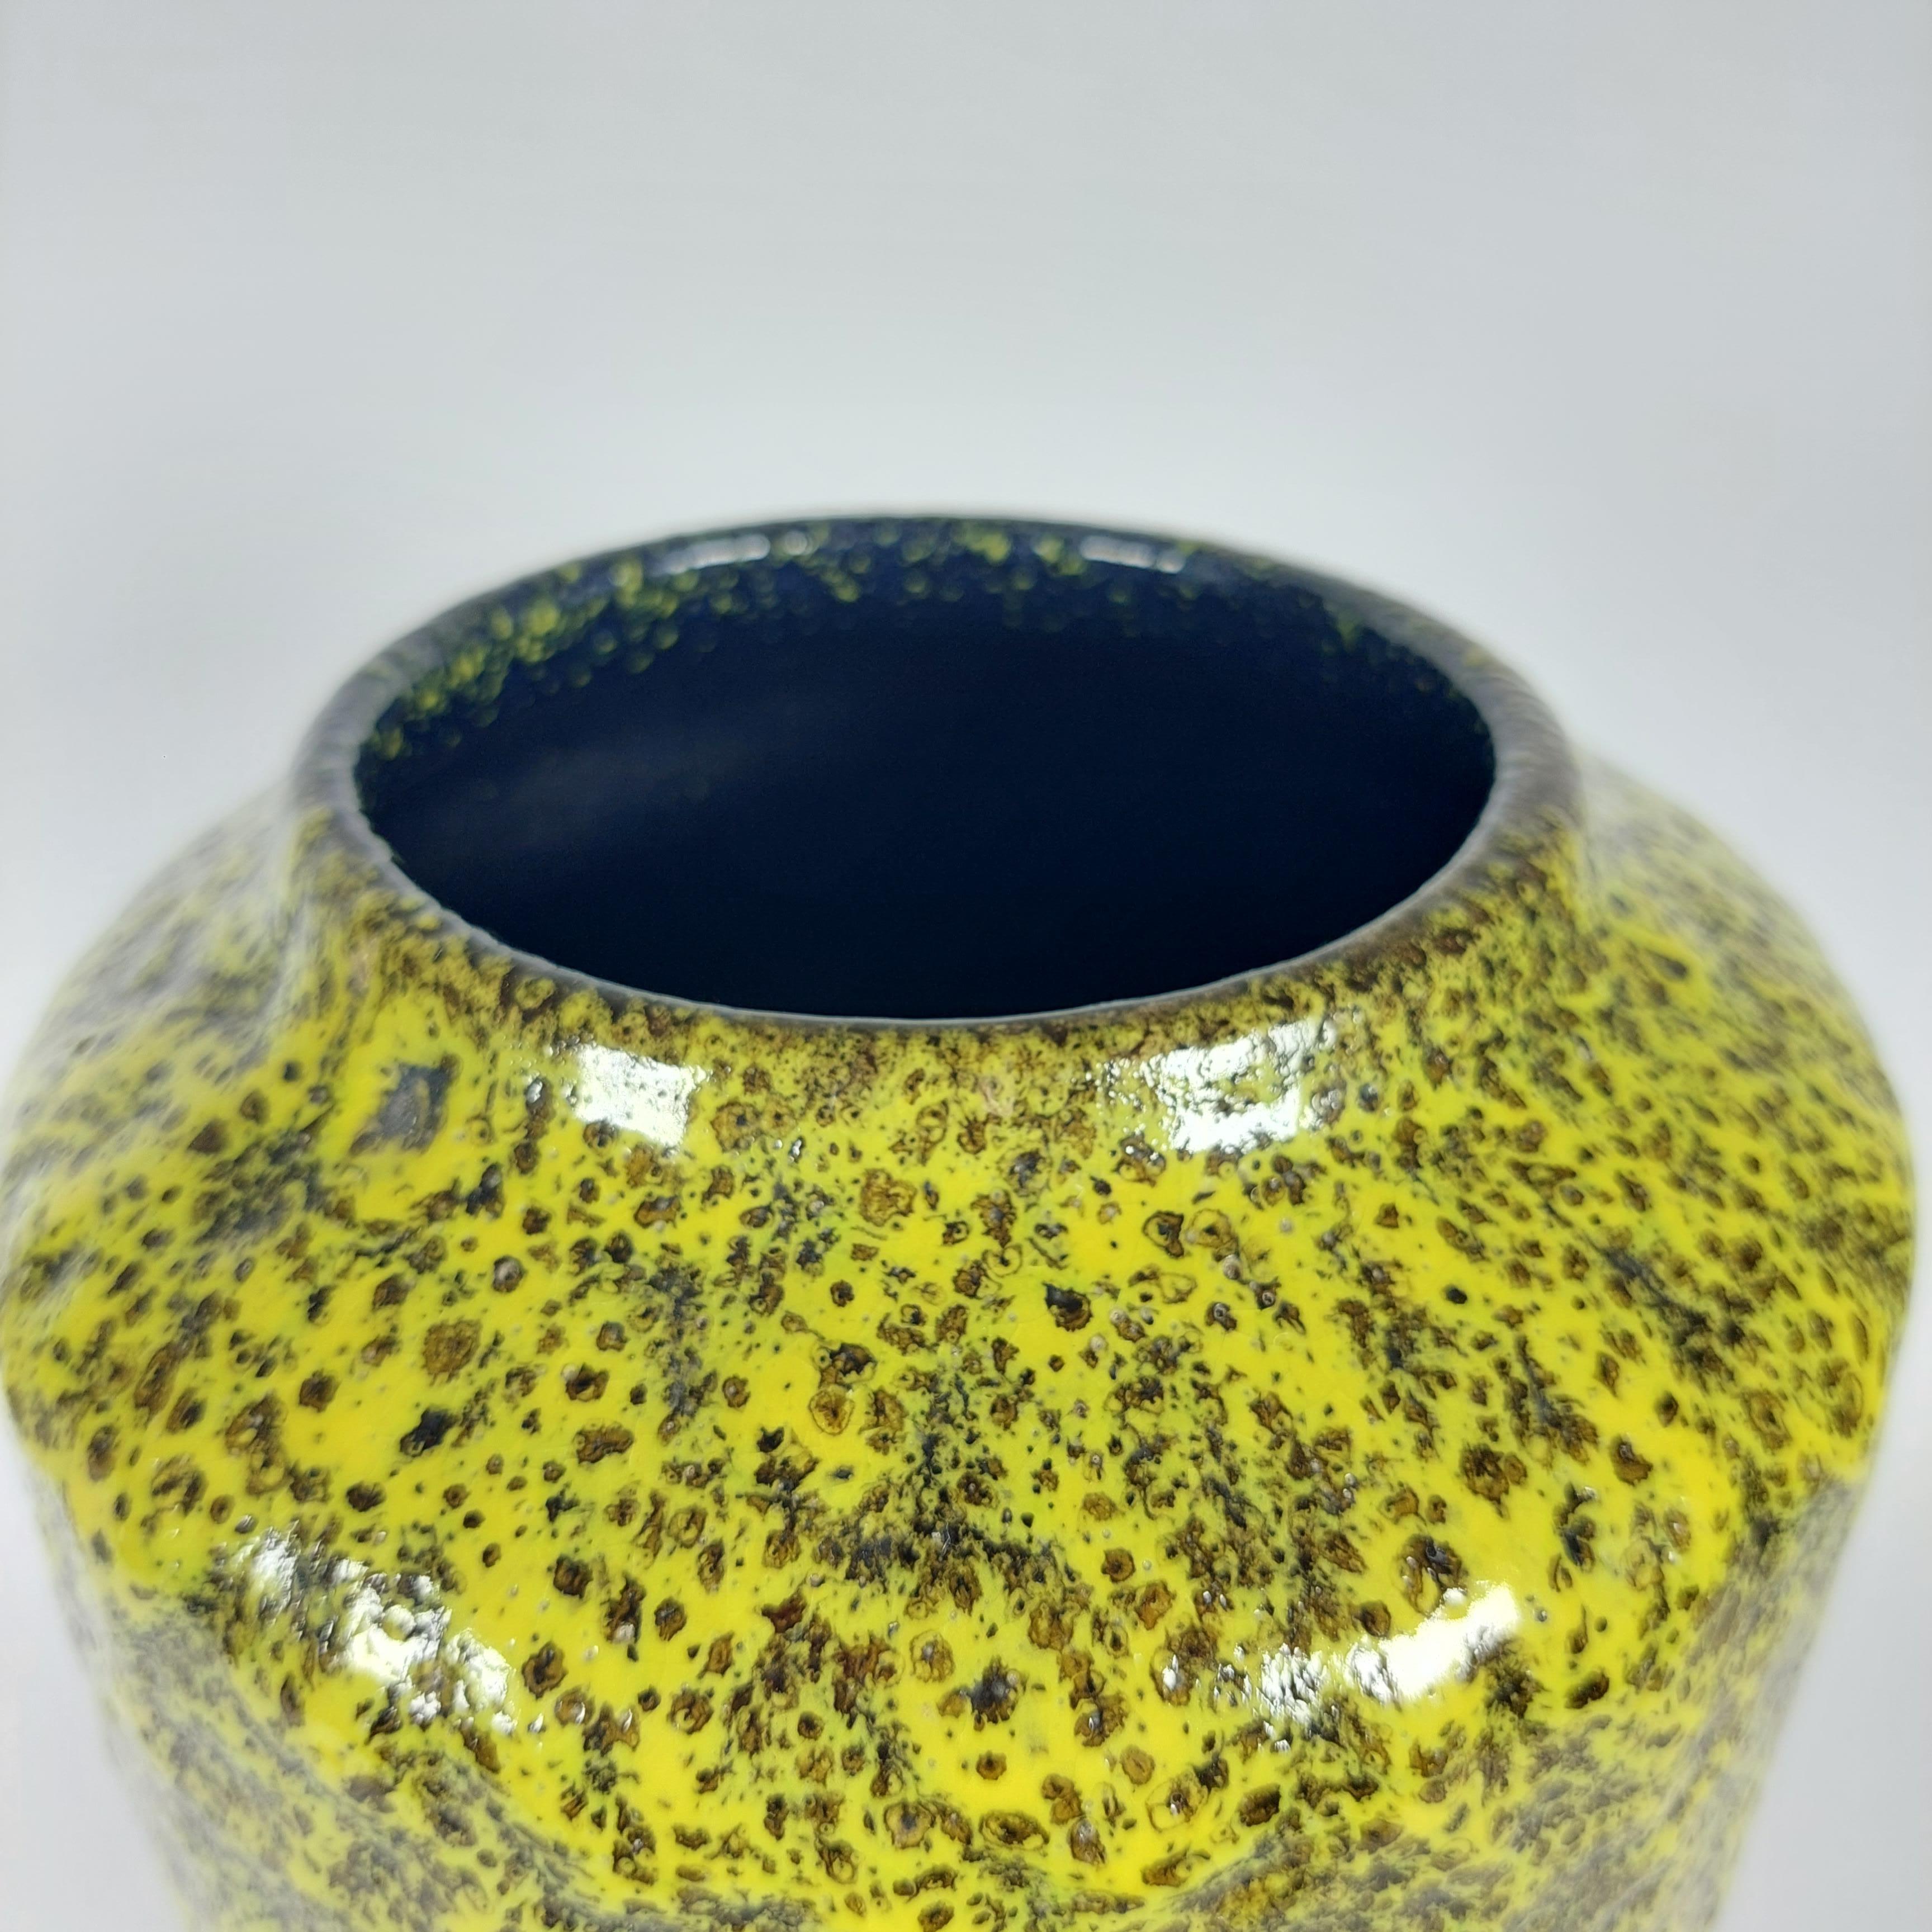 Scheurich West German Fat Lava Pottery Vase 1970s Nr. 517-30 In Good Condition For Sale In Basel, BS